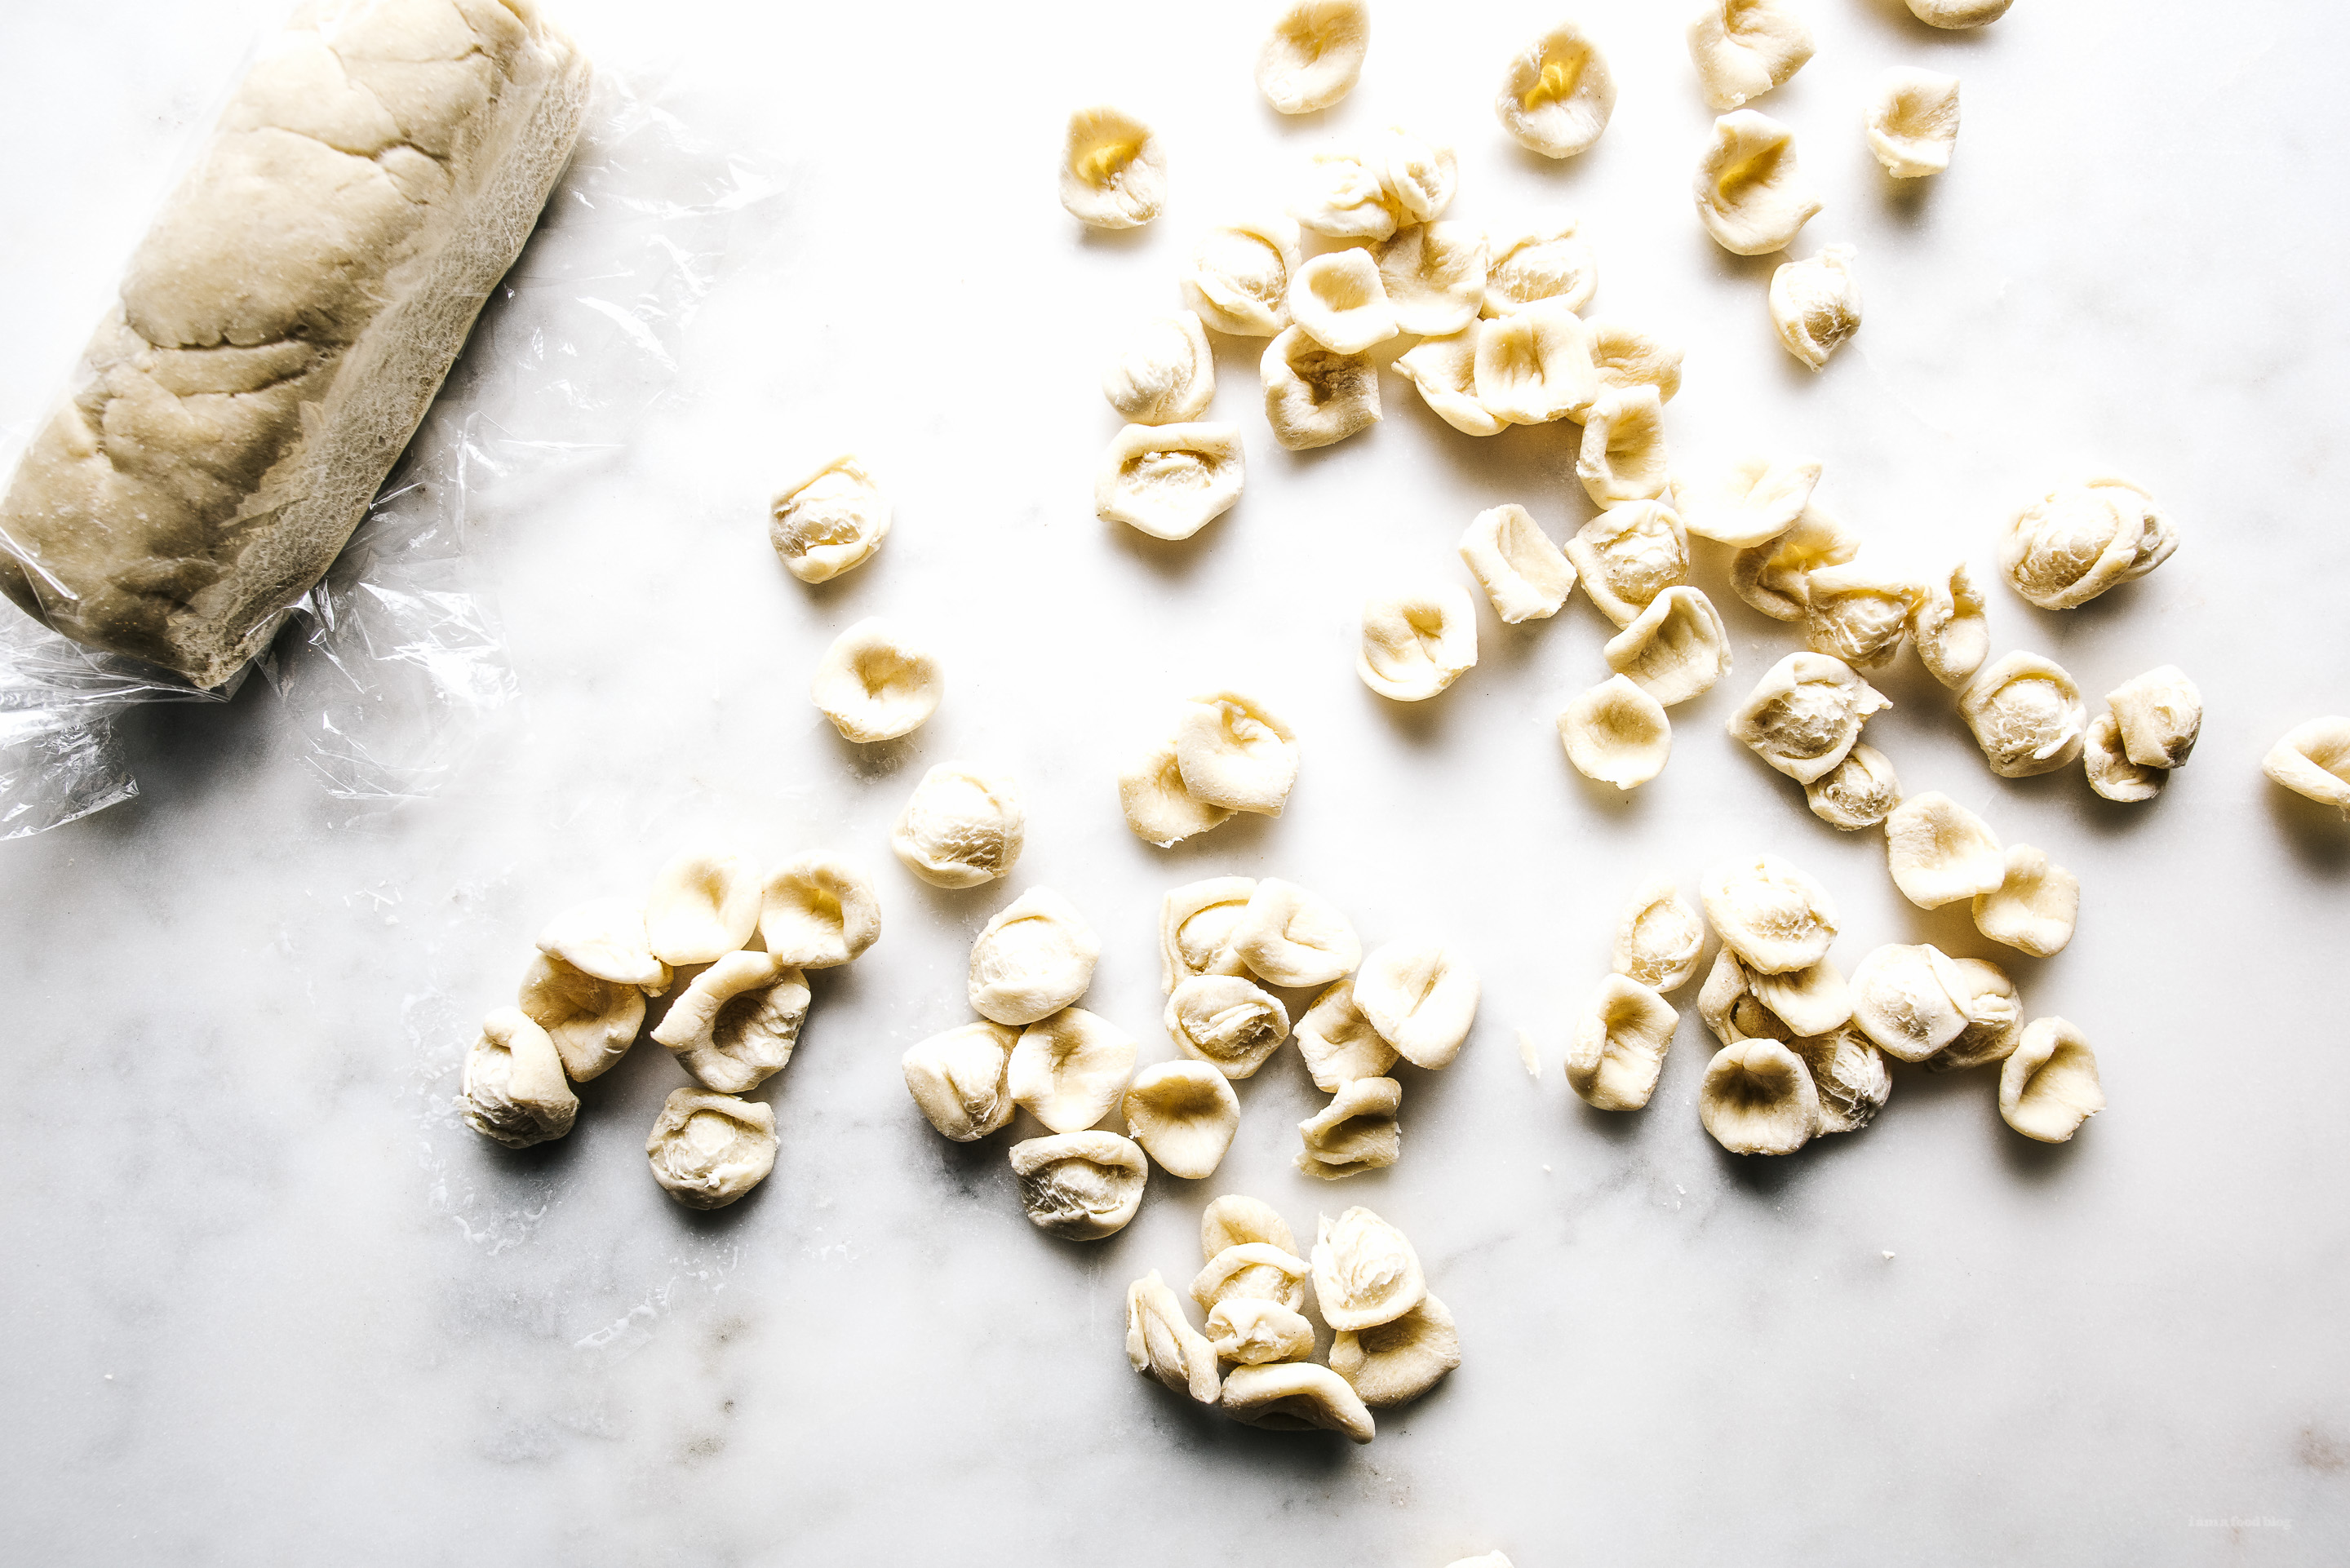 st. patrick's day pot of gold pasta - orecchiette with yellow tomatoes and bocconcini recipe - www.iamafoodblog.com